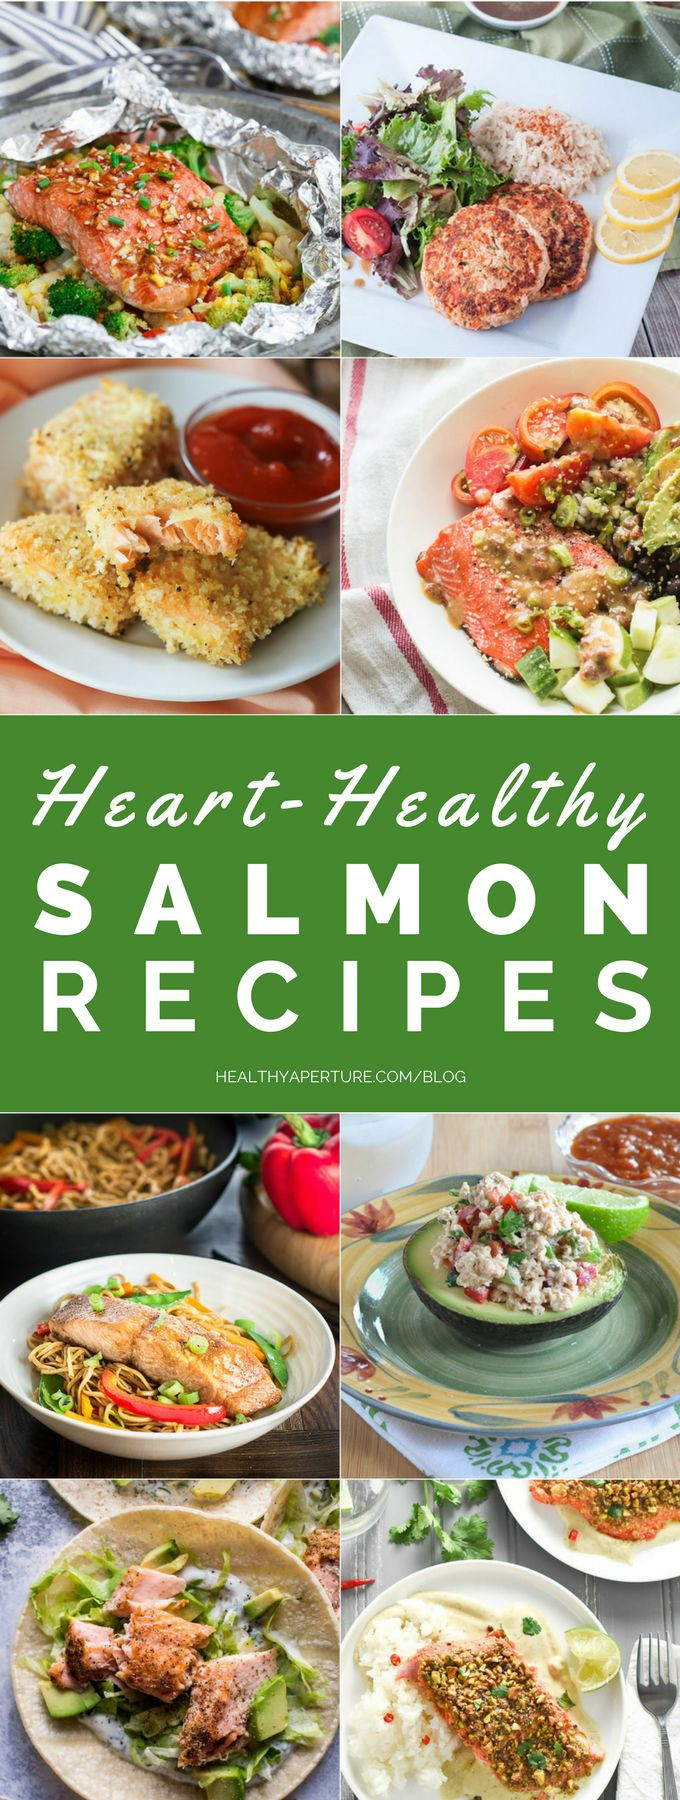 Heart Healthy Recipes For Dinner
 The 25 best Heart healthy recipes ideas on Pinterest